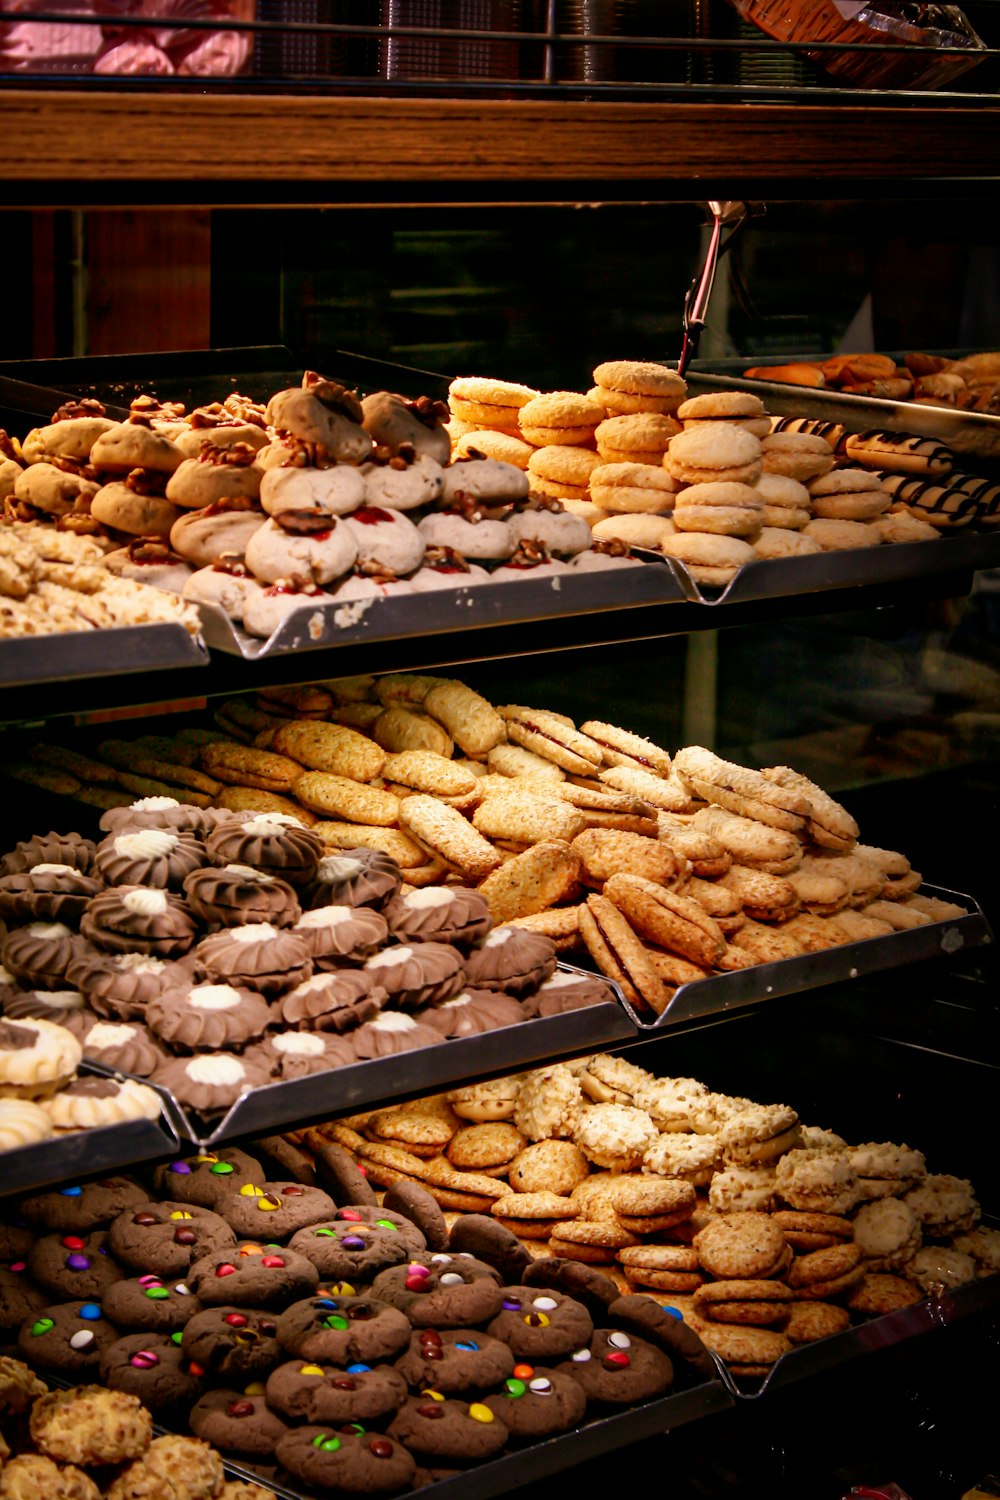 a bakery display with pastries